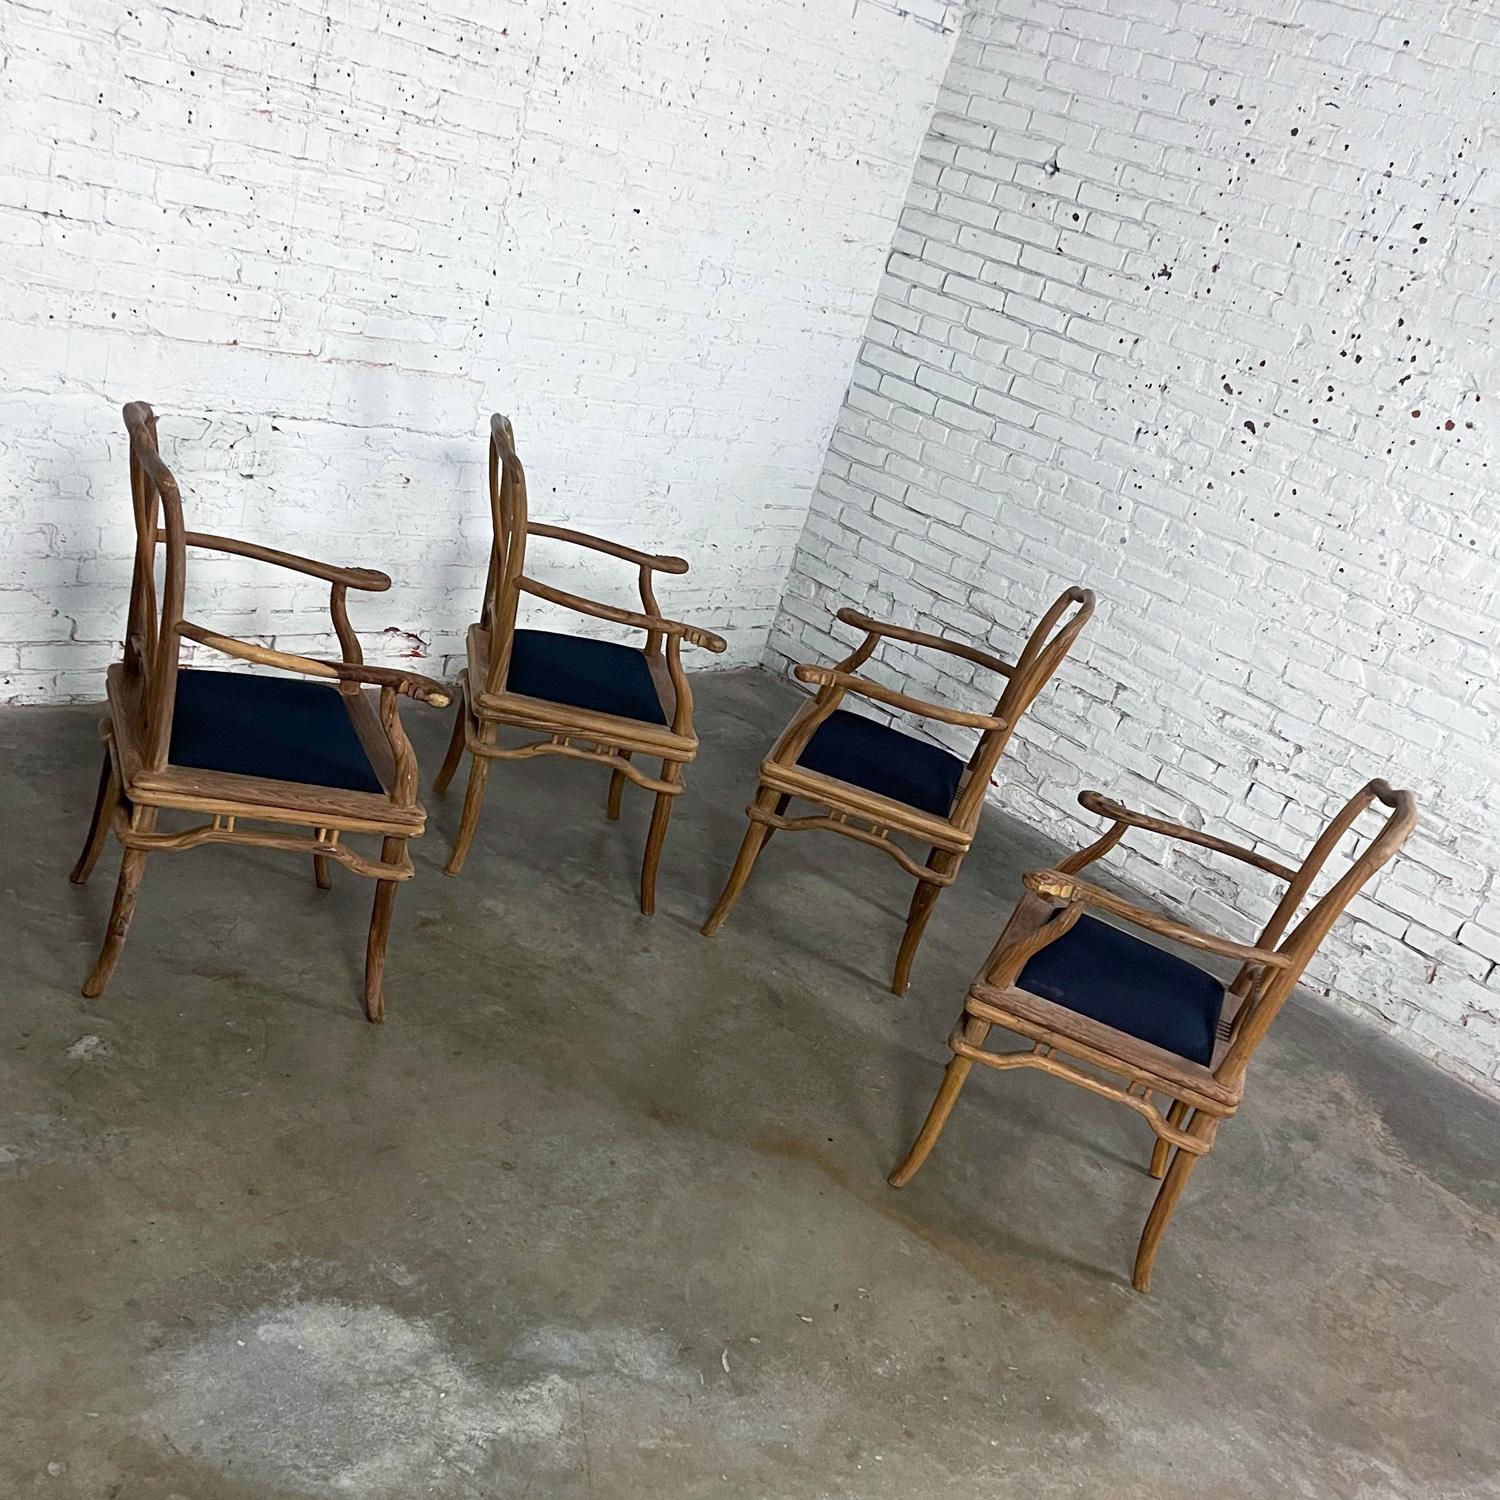 Late 20th Ming Style Indonesian Dining Armed Chairs Natural Teak w/ Black Seats For Sale 5